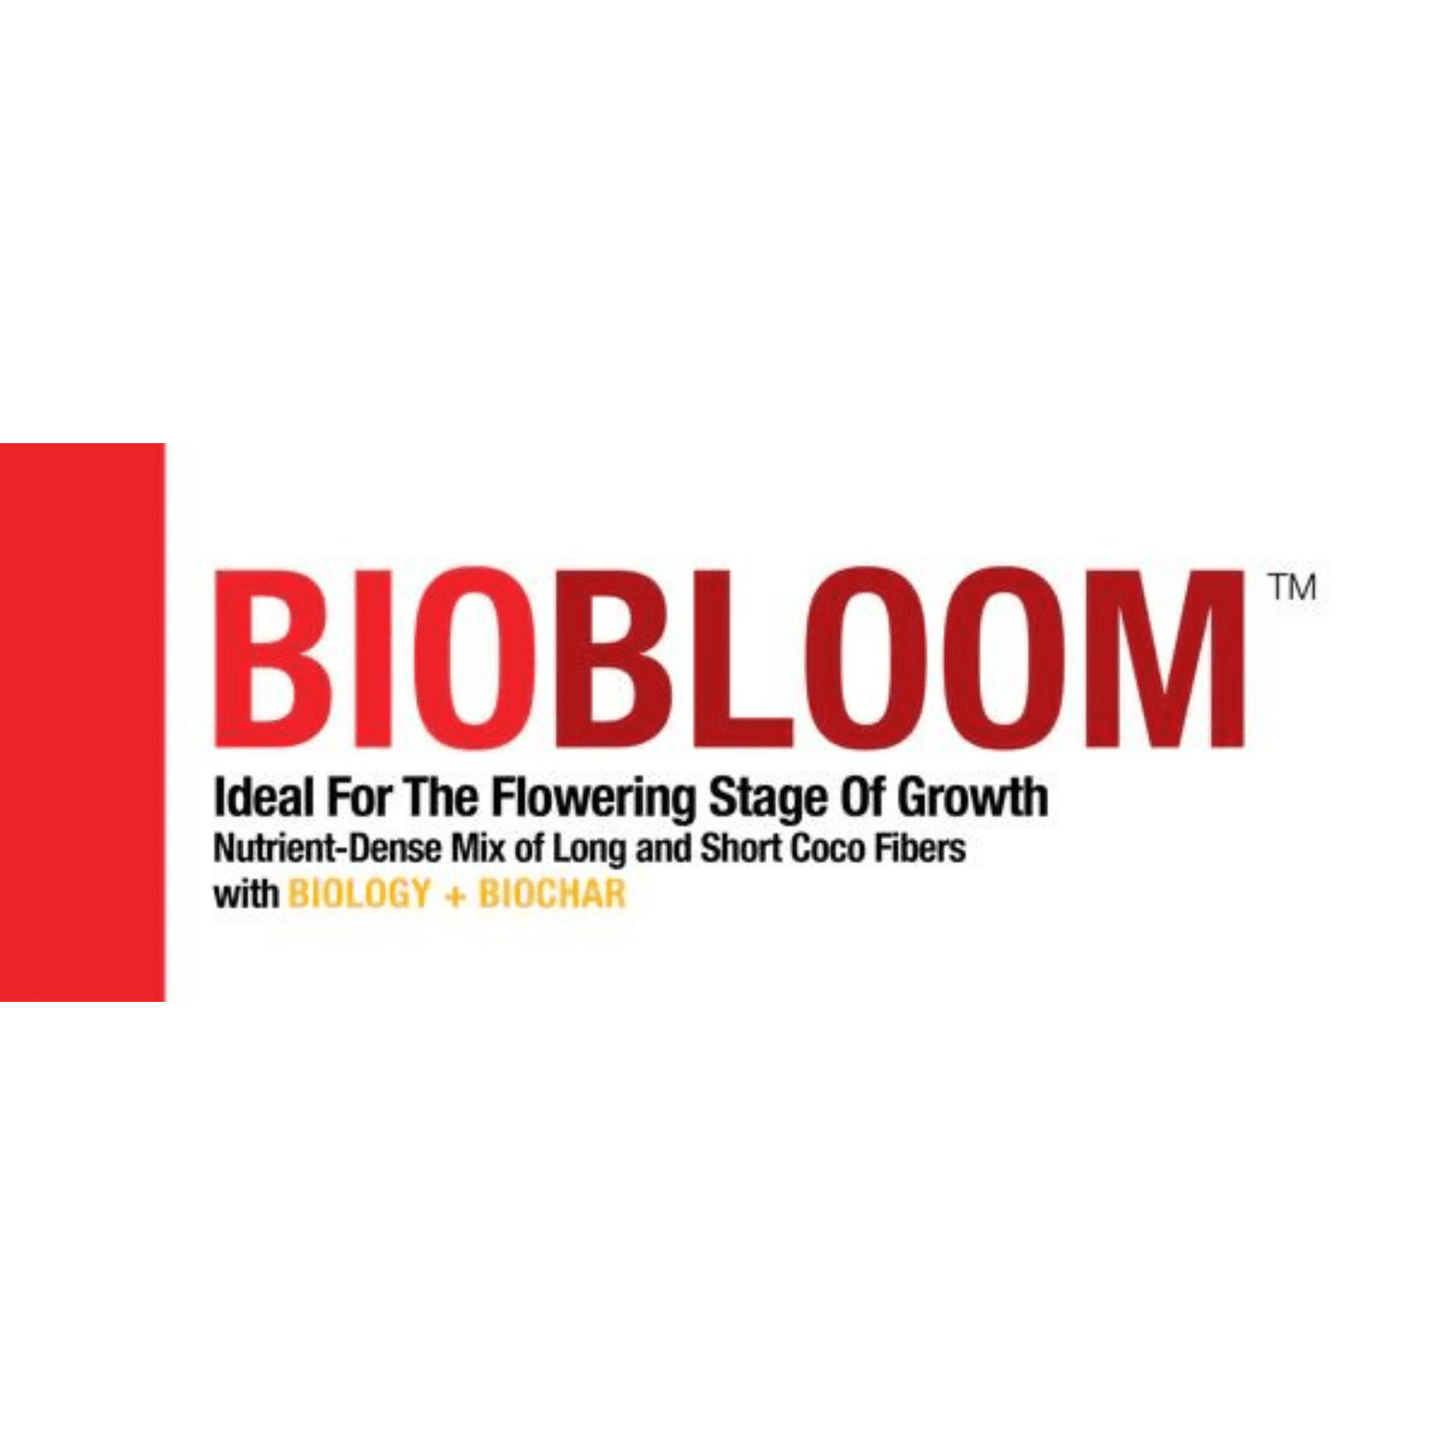 bio365 BIOBLOOM 1.5cu ft Blend of Coarse Coir and Coarse Peat BB015001 Planting & Watering 850018264044